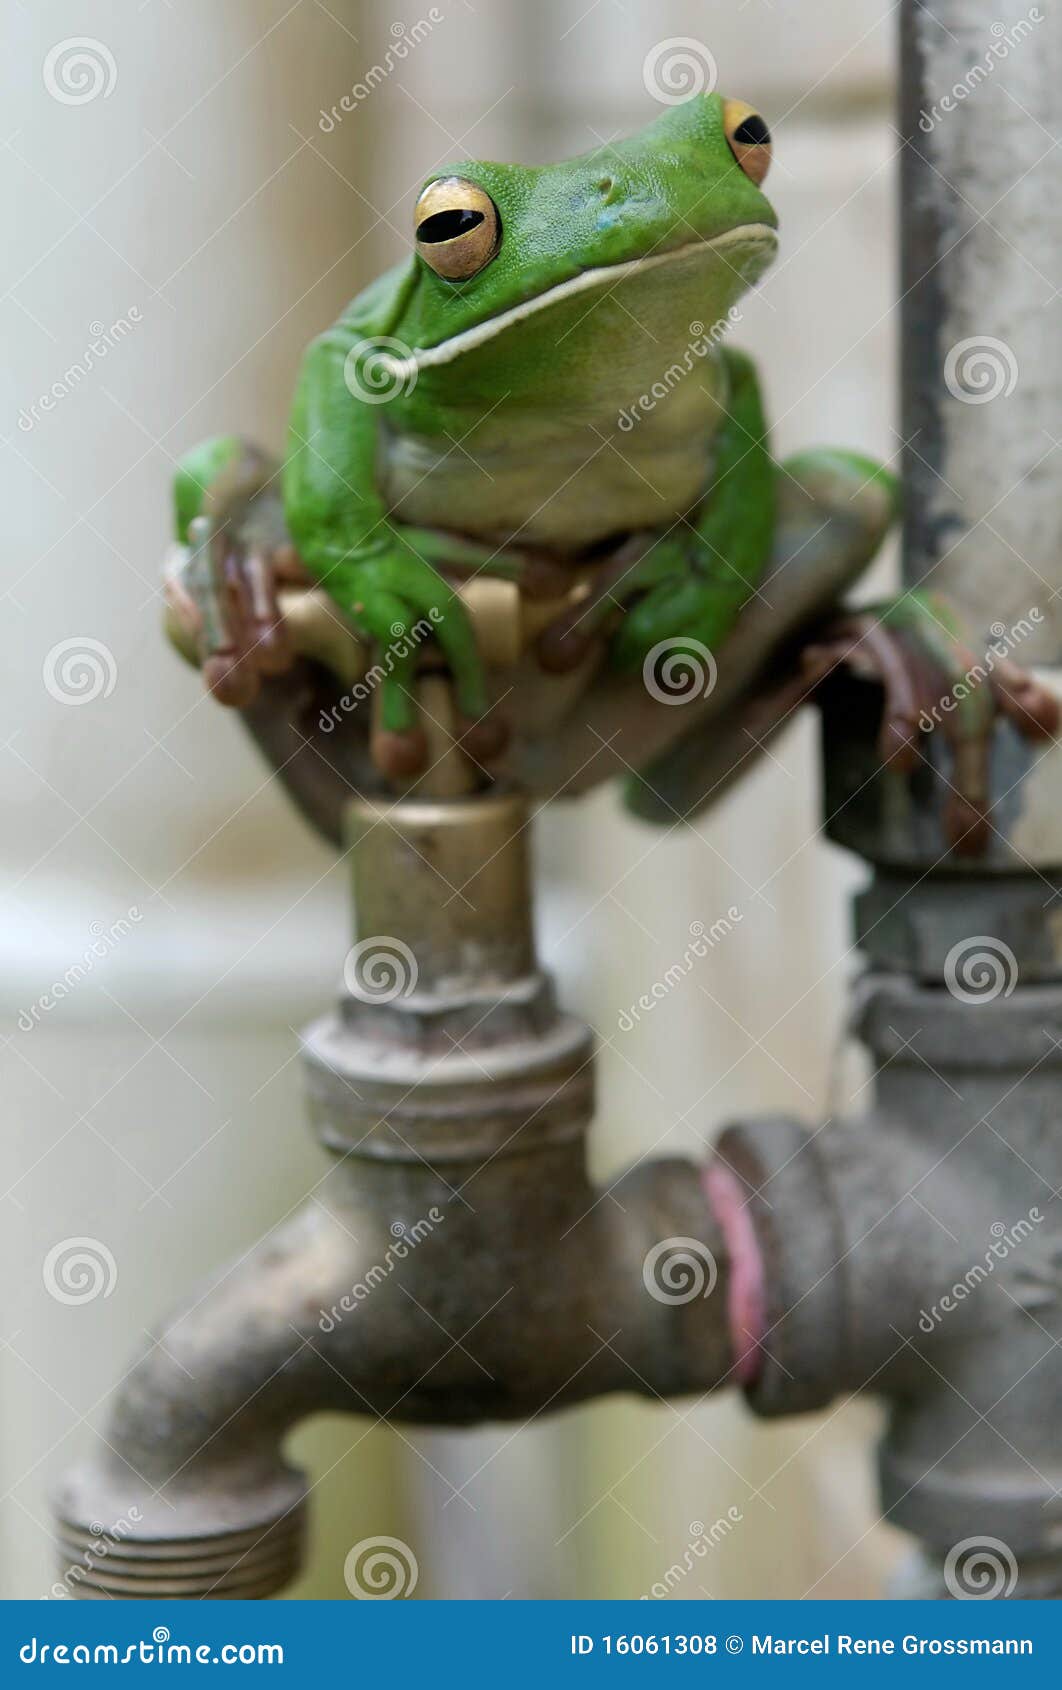 white-lipped tree frog on faucet